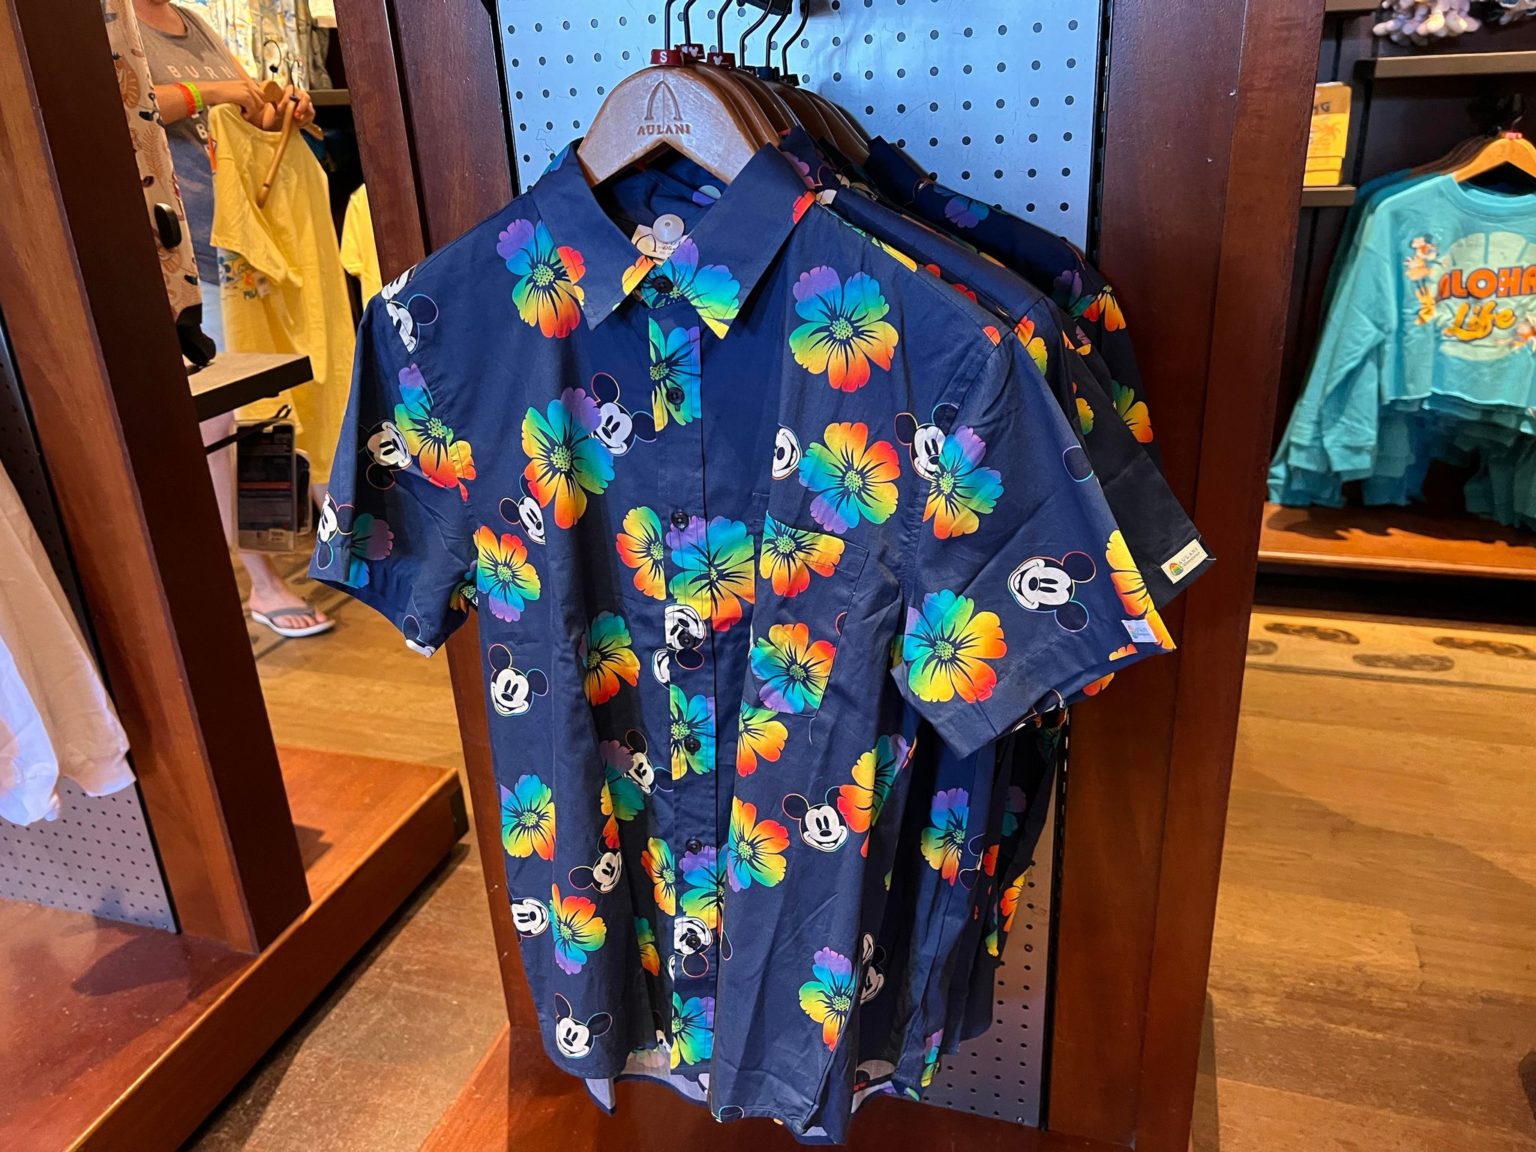 Colorful Pride Collection Arrives at Aulani - MickeyBlog.com